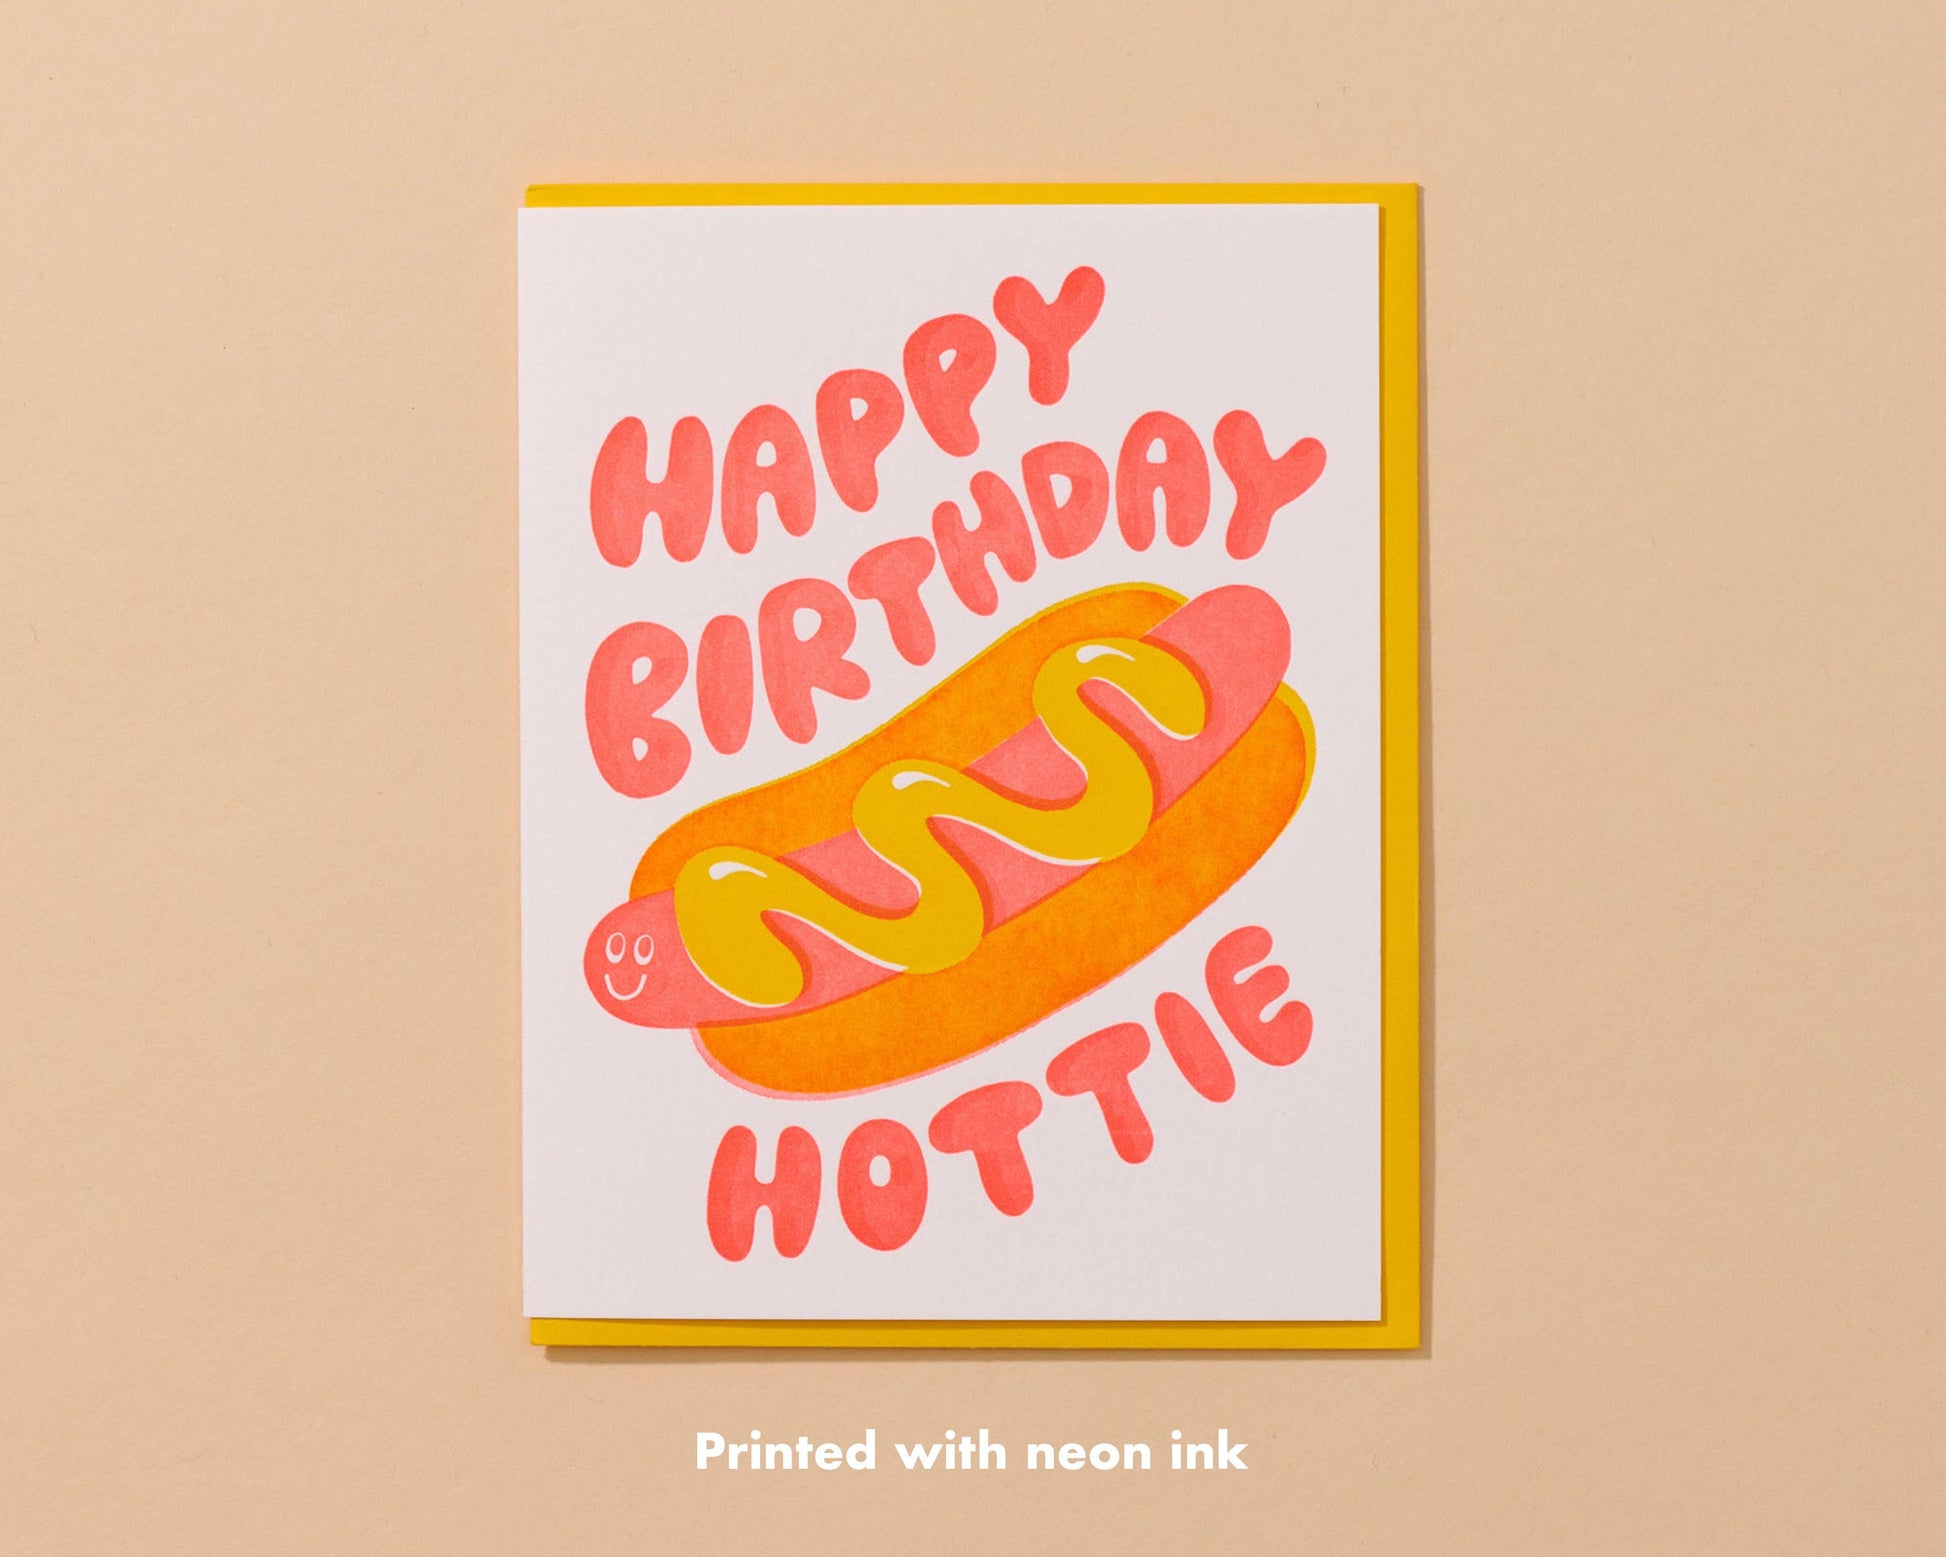 Card reads: "Happy birthday, hottie" with a picture of a hot dog.